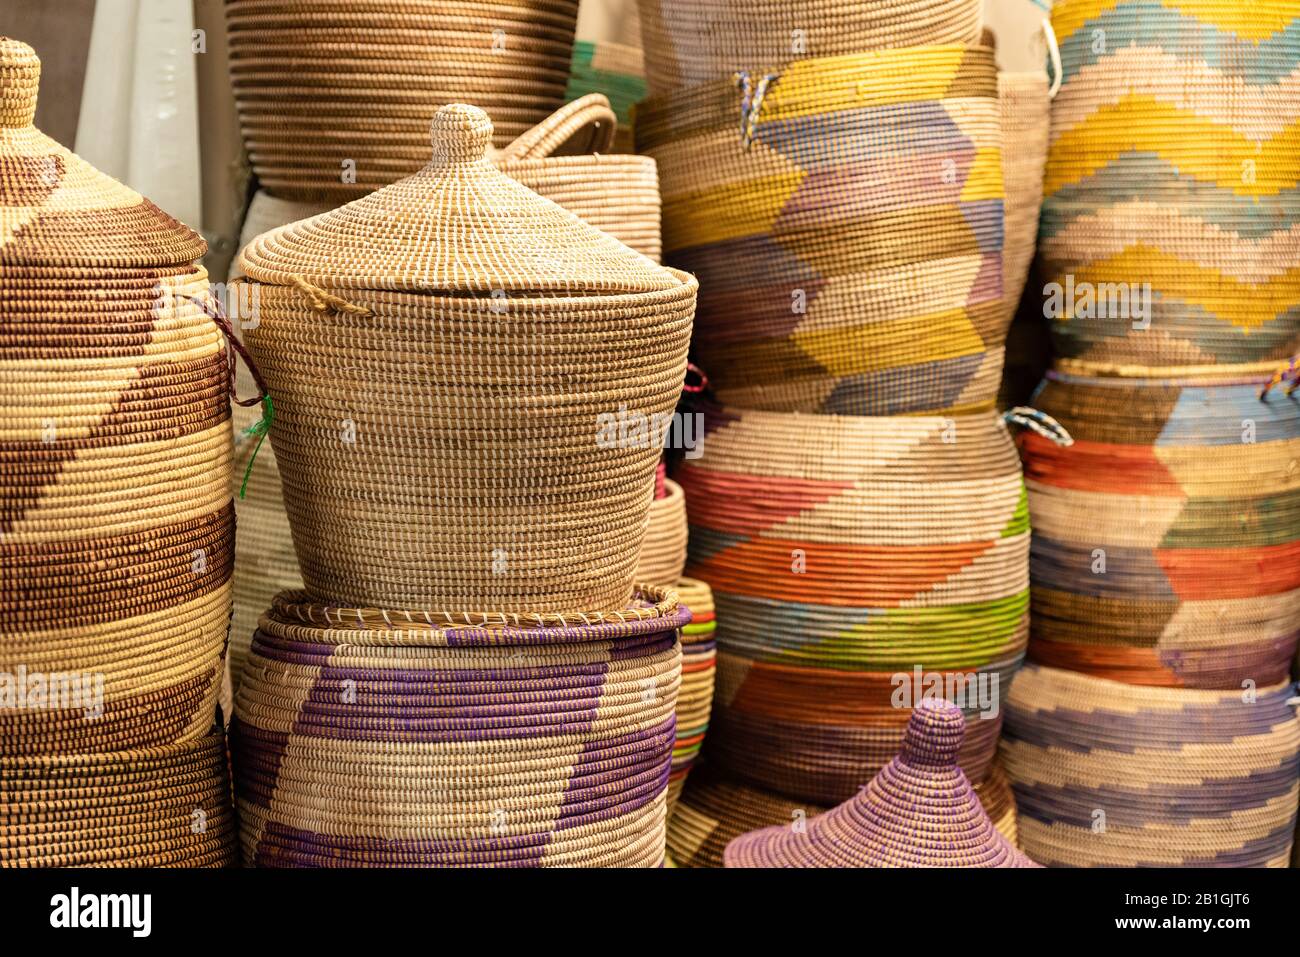 Basket Making Supplies for Sale at a Market in Bali Indonesia